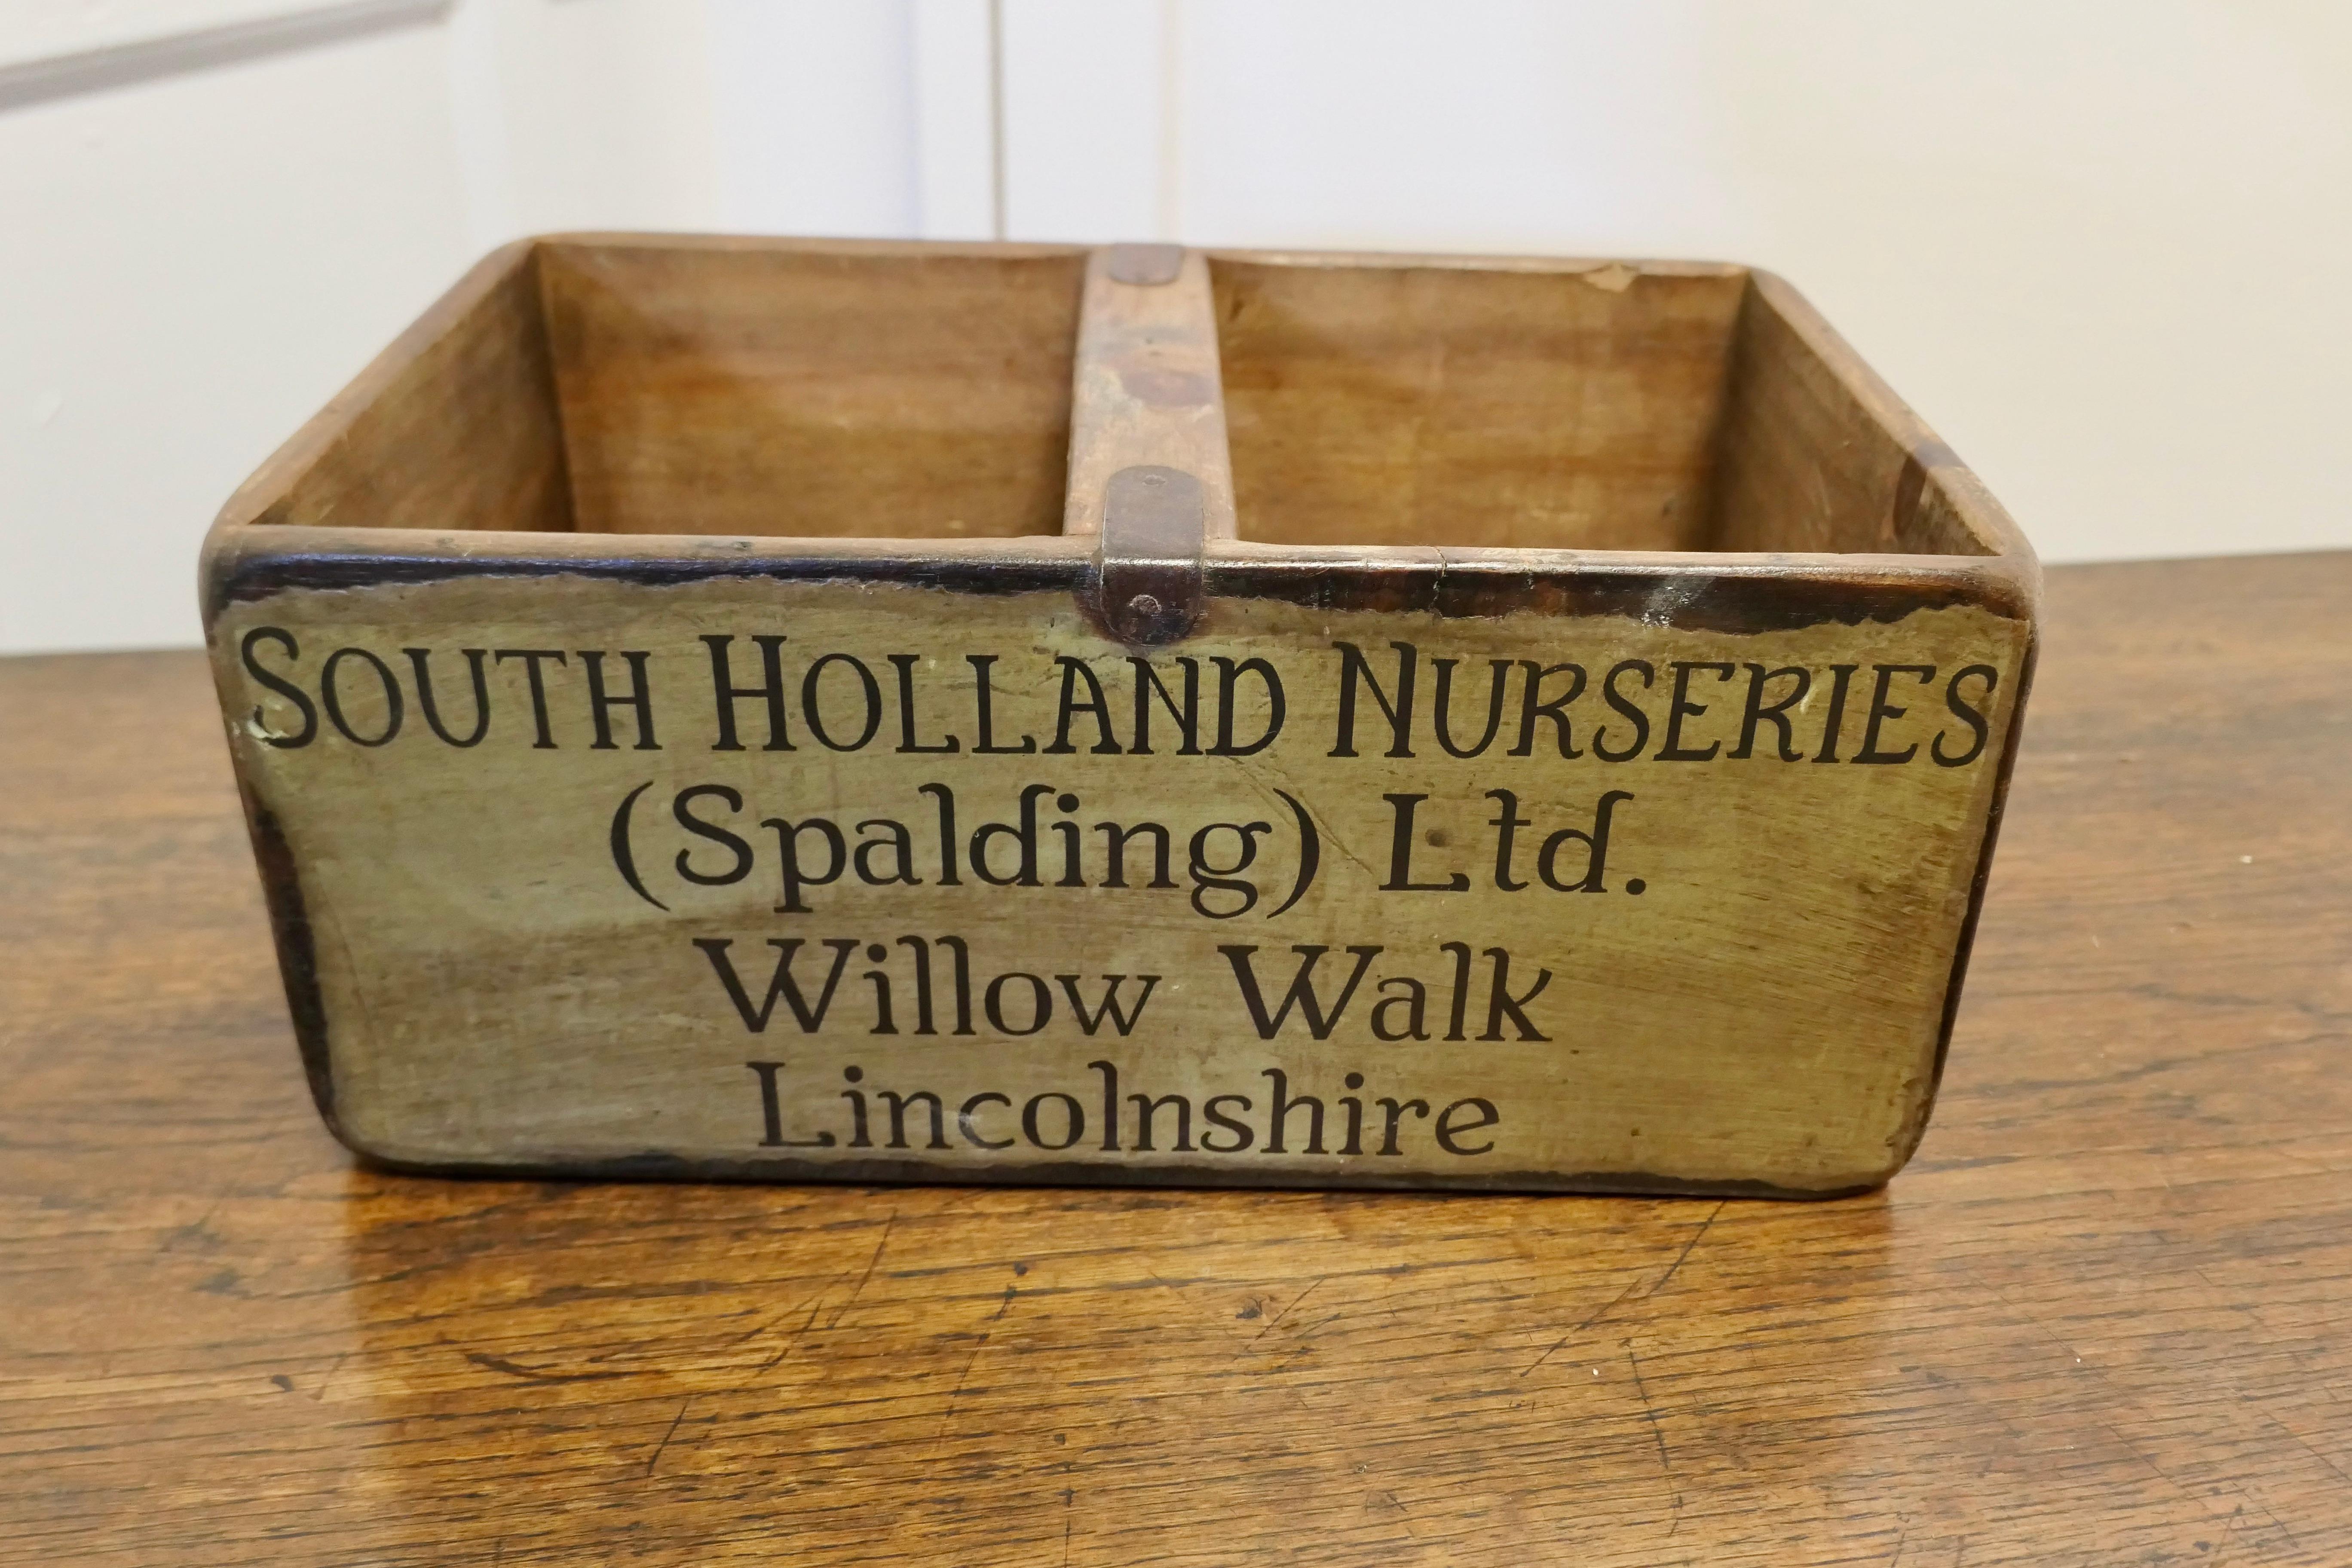 Decorative Re Painted 19th Century Wine Box, Trug

A delightful piece painted over, advertising South Holland Nurseries 
The Carrier is made in pine and painted in Olive green and divided in 2
A great piece of attractive kitchenalia 
The Box is 6”